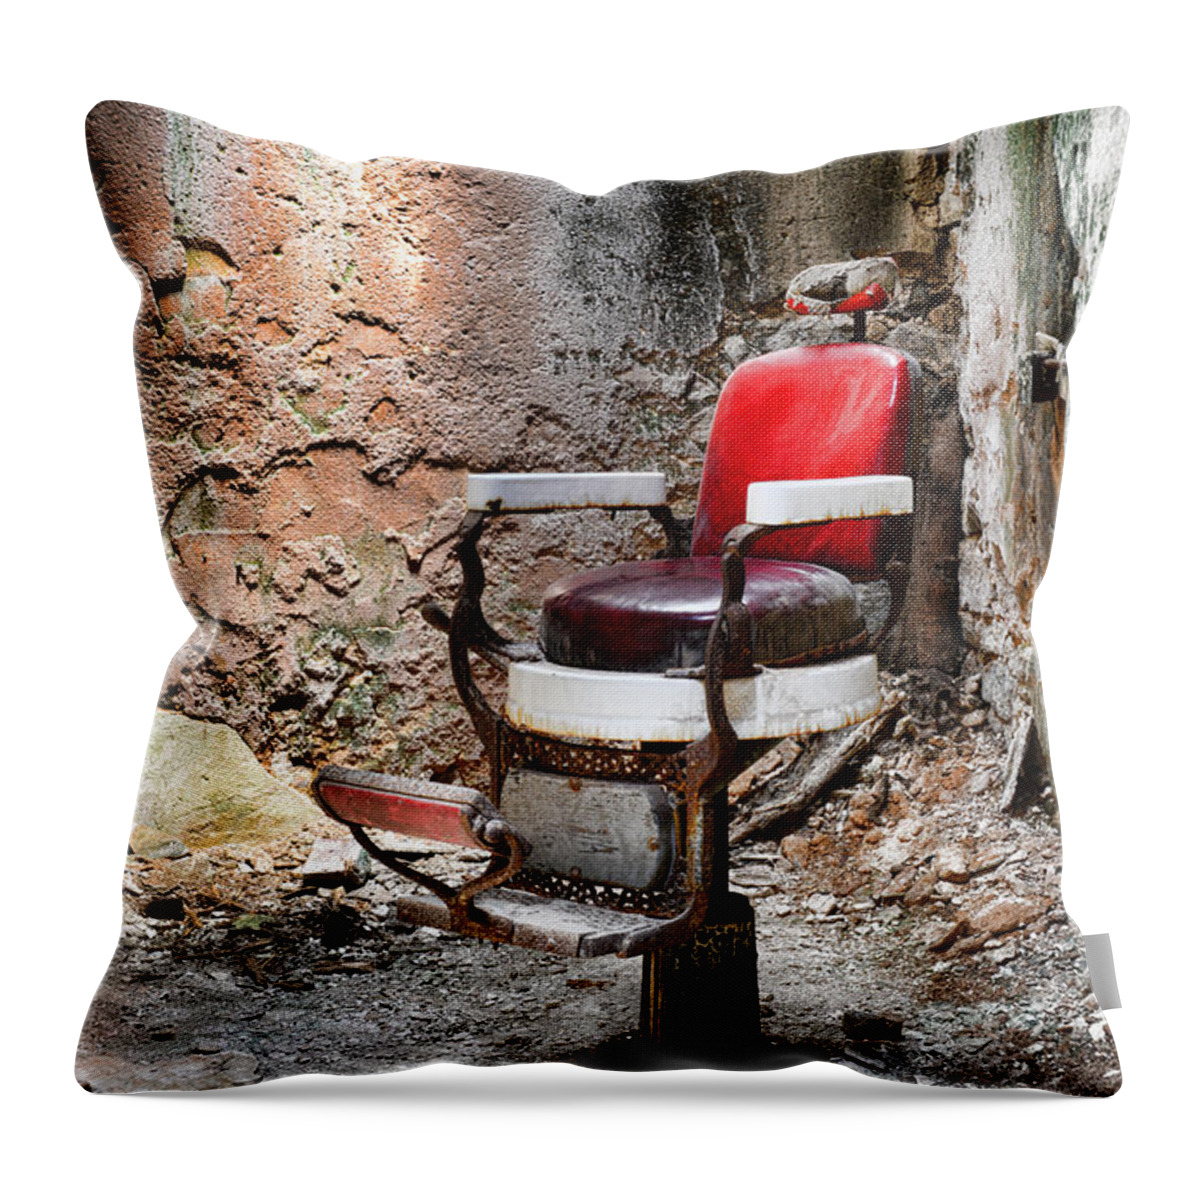 Eastern State Penitentiary Throw Pillow featuring the photograph Barber Chair by Paul Ward